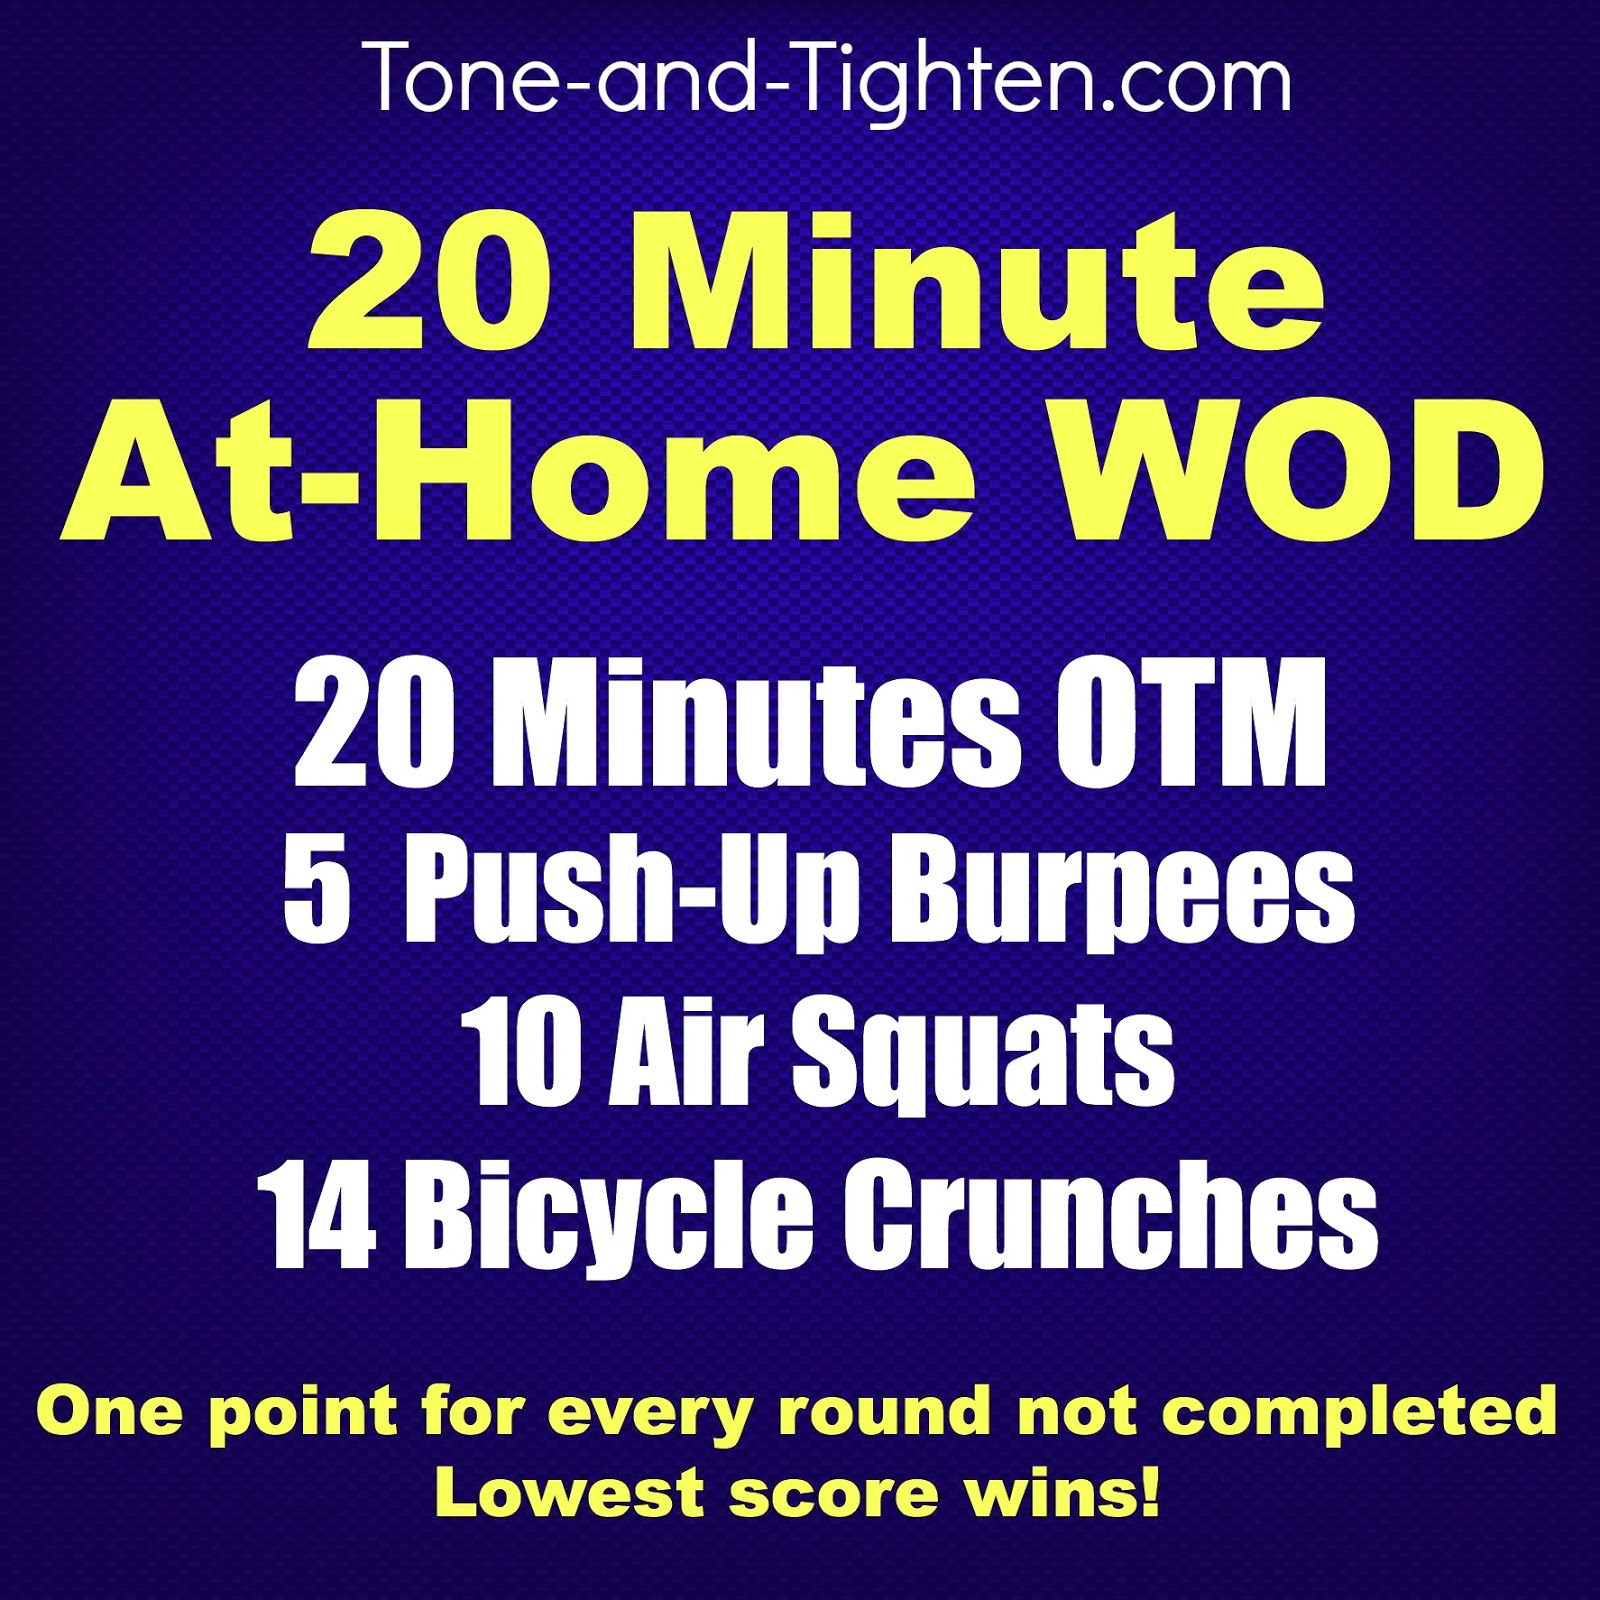 20 Minute At-Home WOD